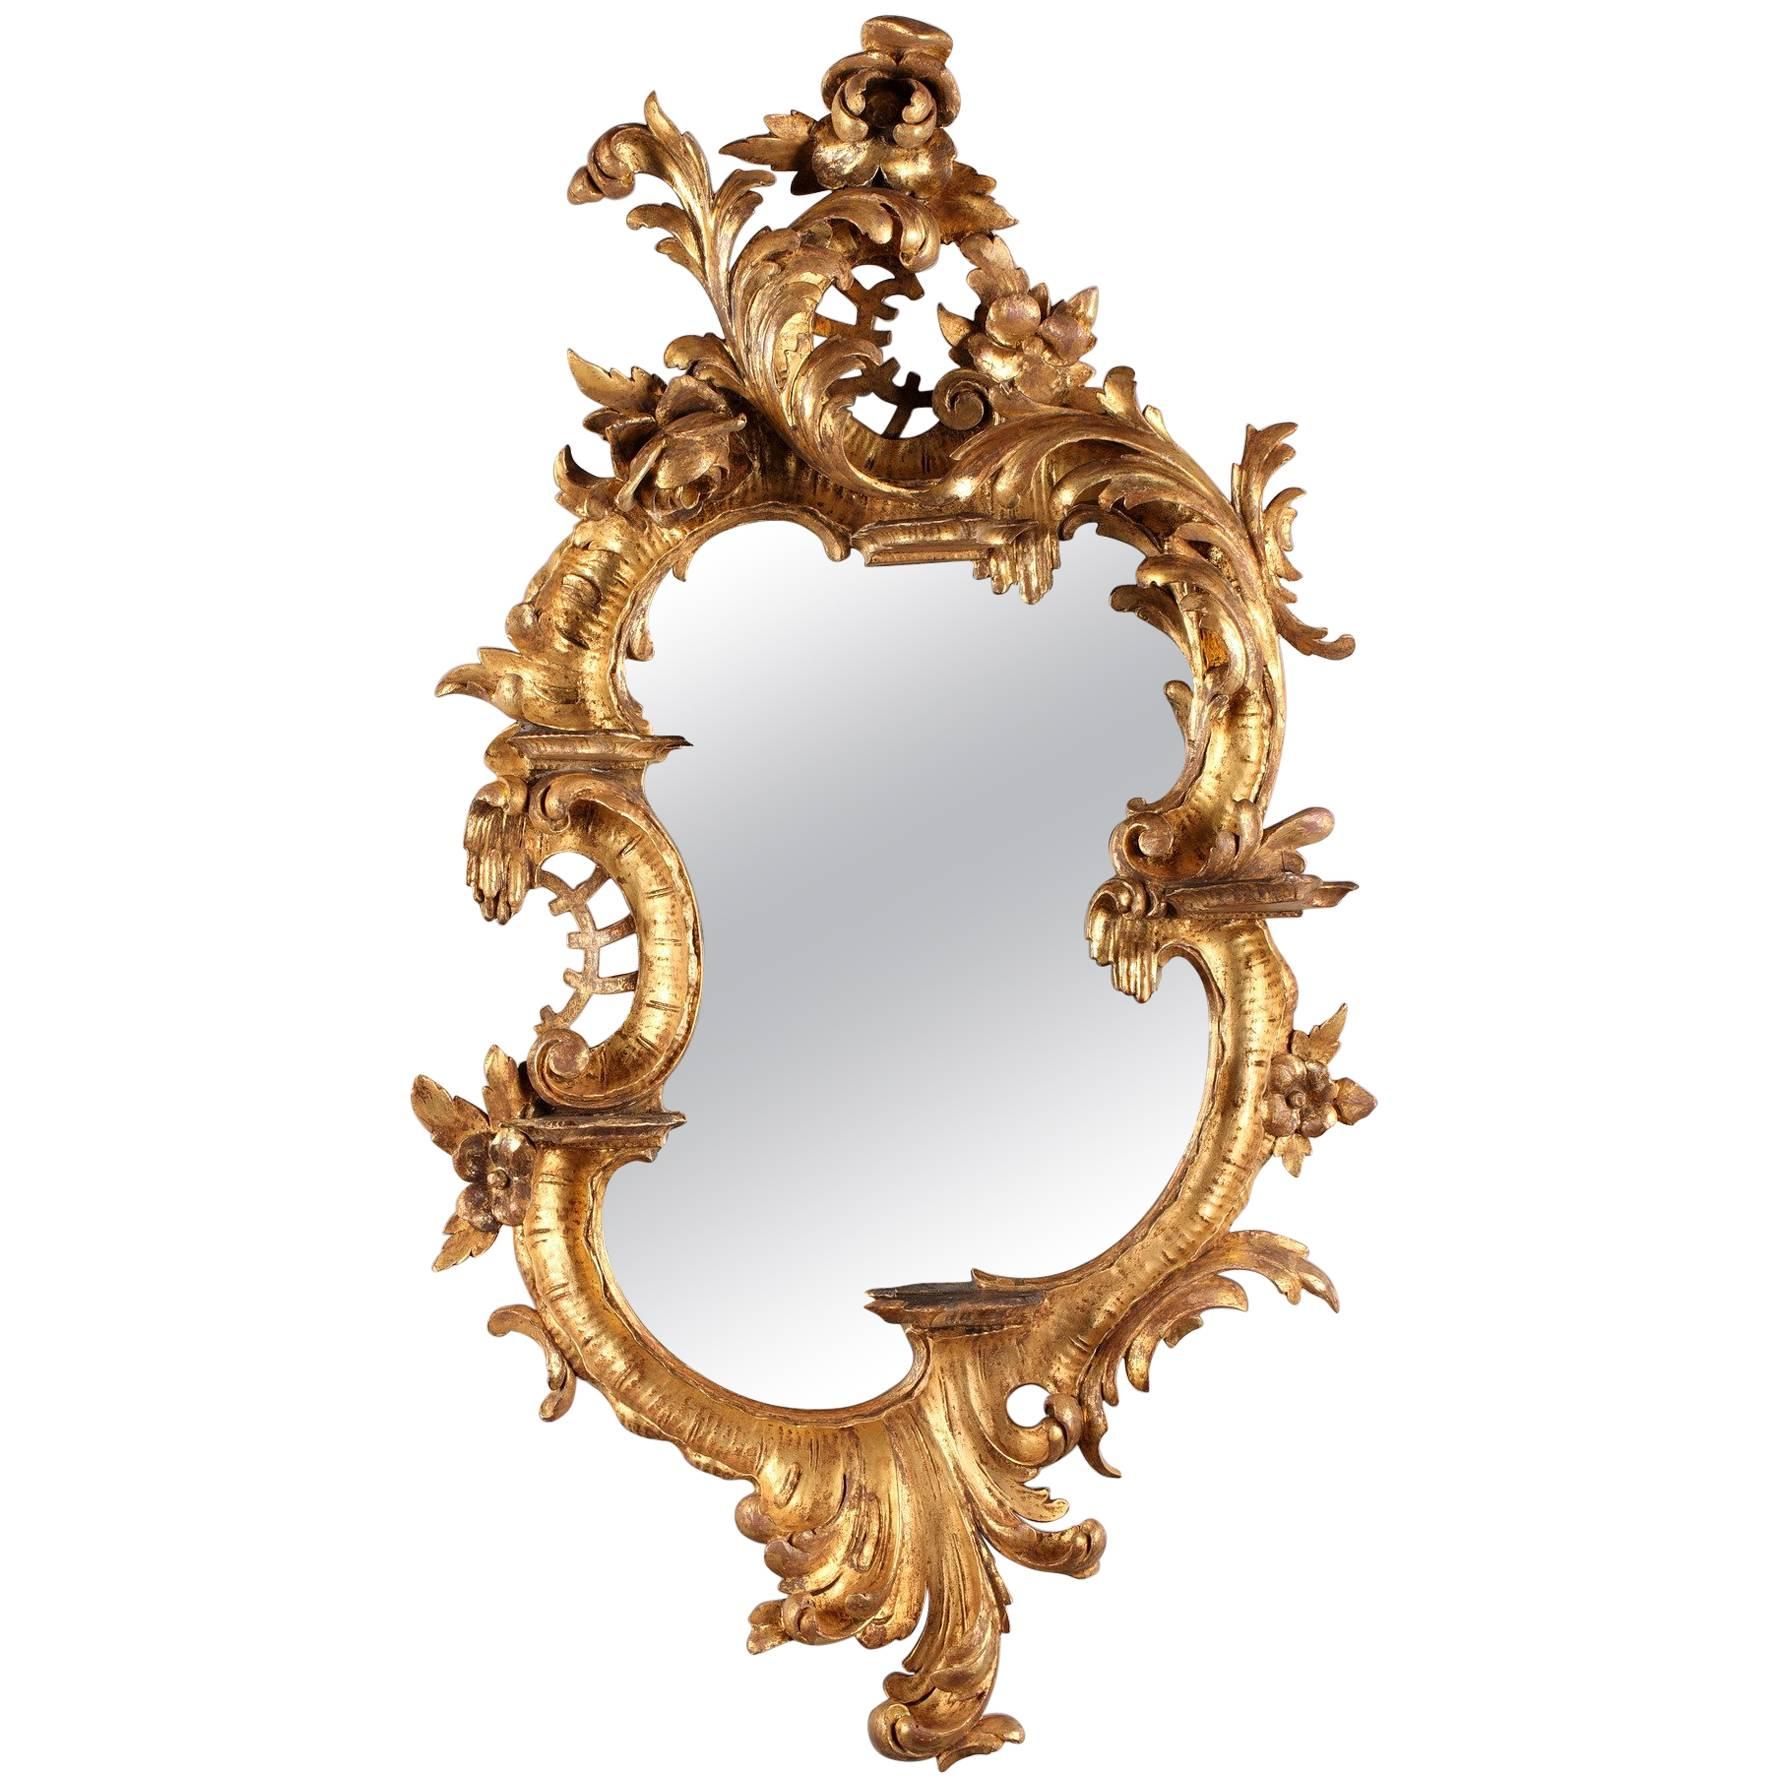 18th Century Venetian Giltwood Mirror with Consoles